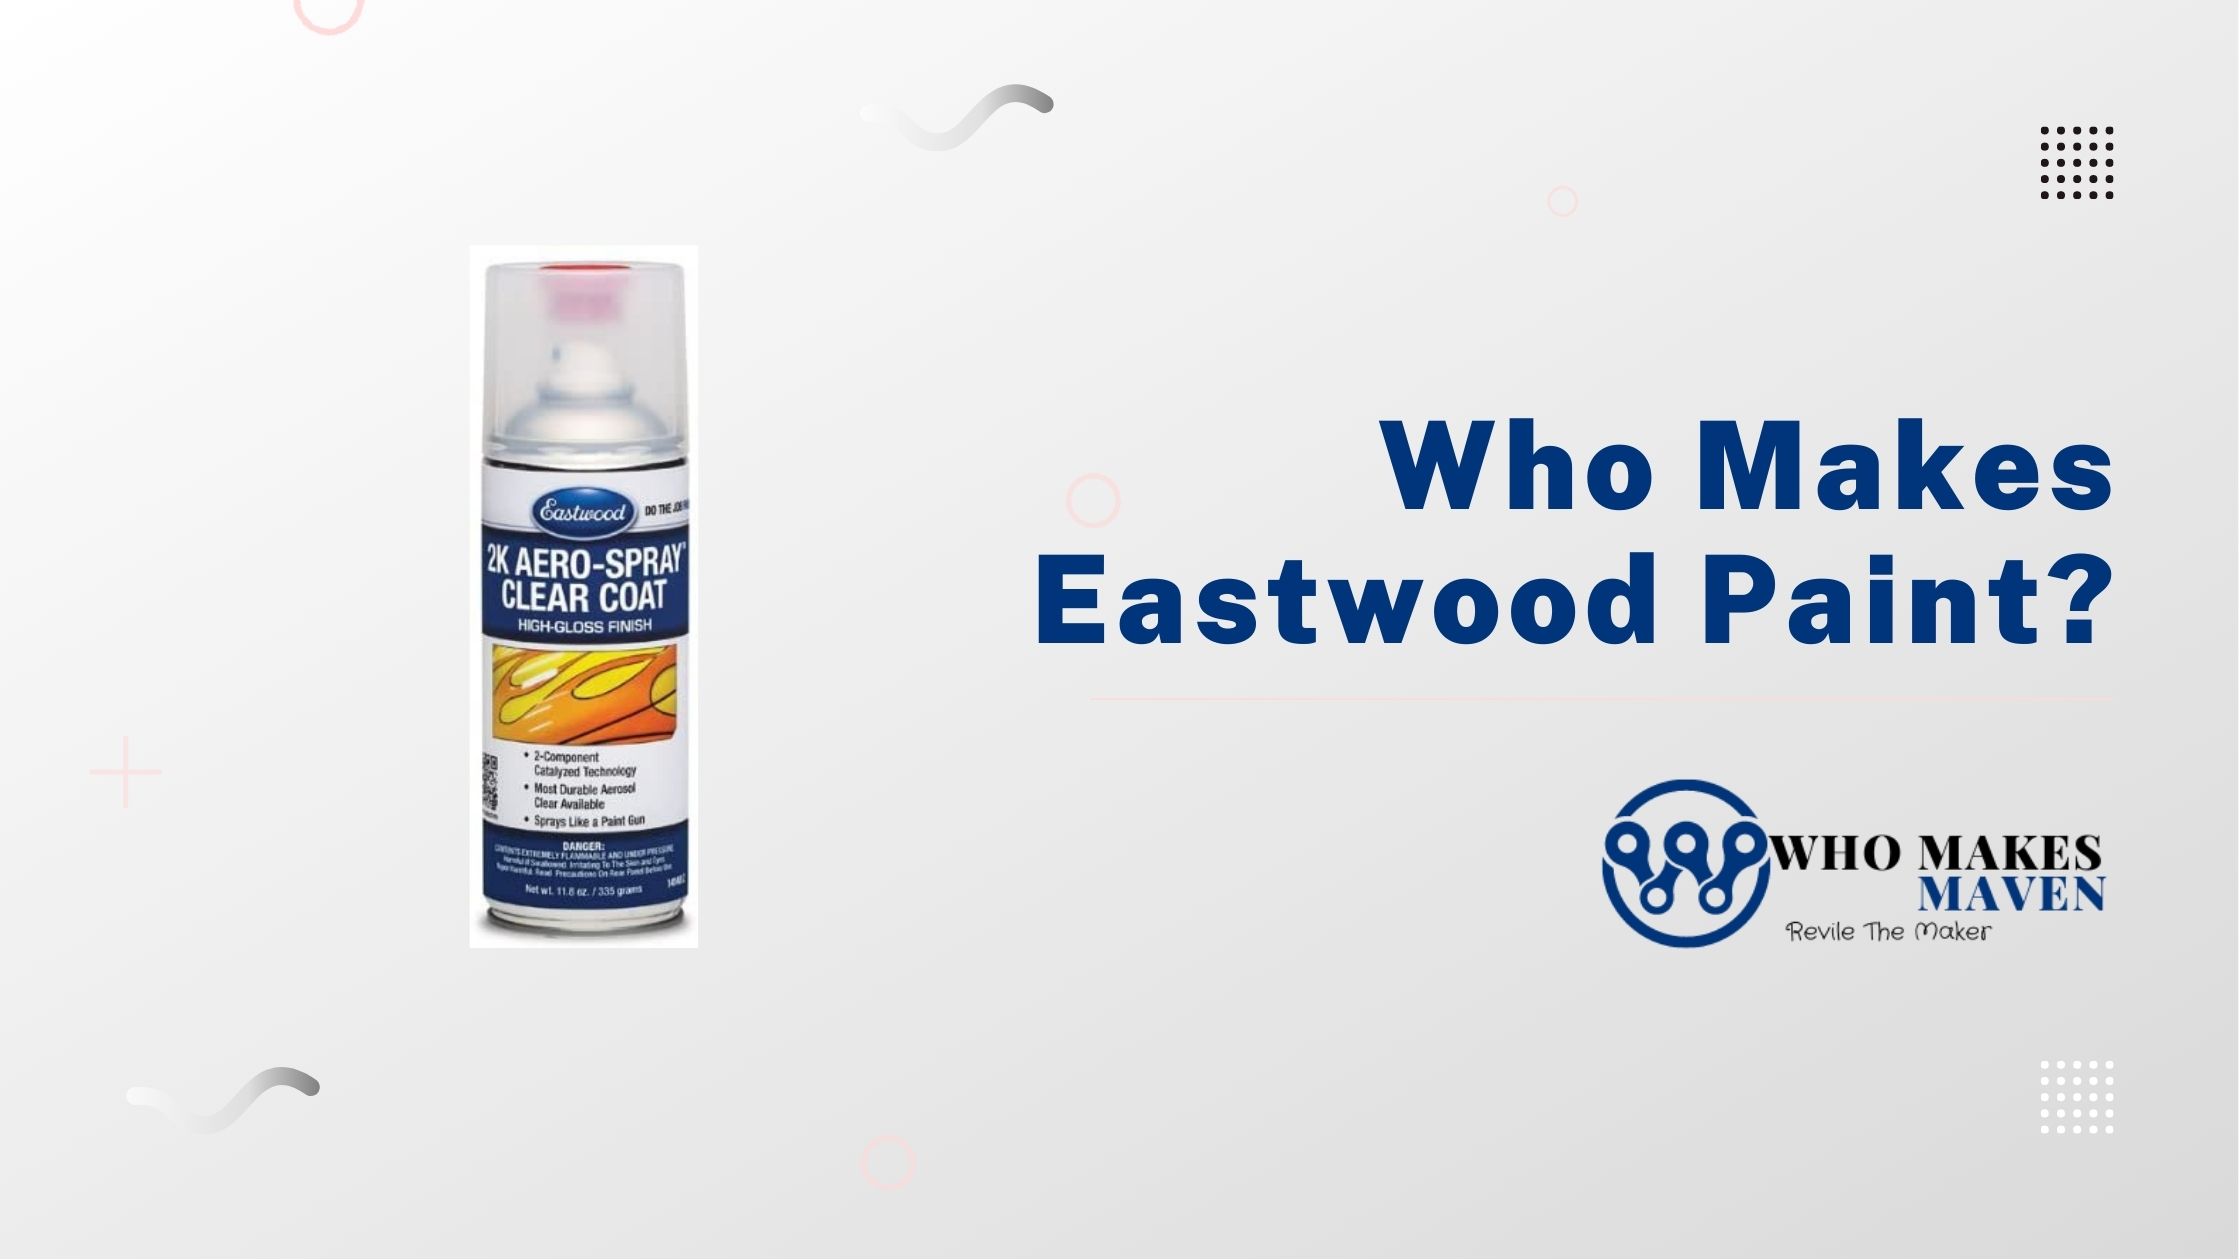 Who Makes Eastwood Paint?